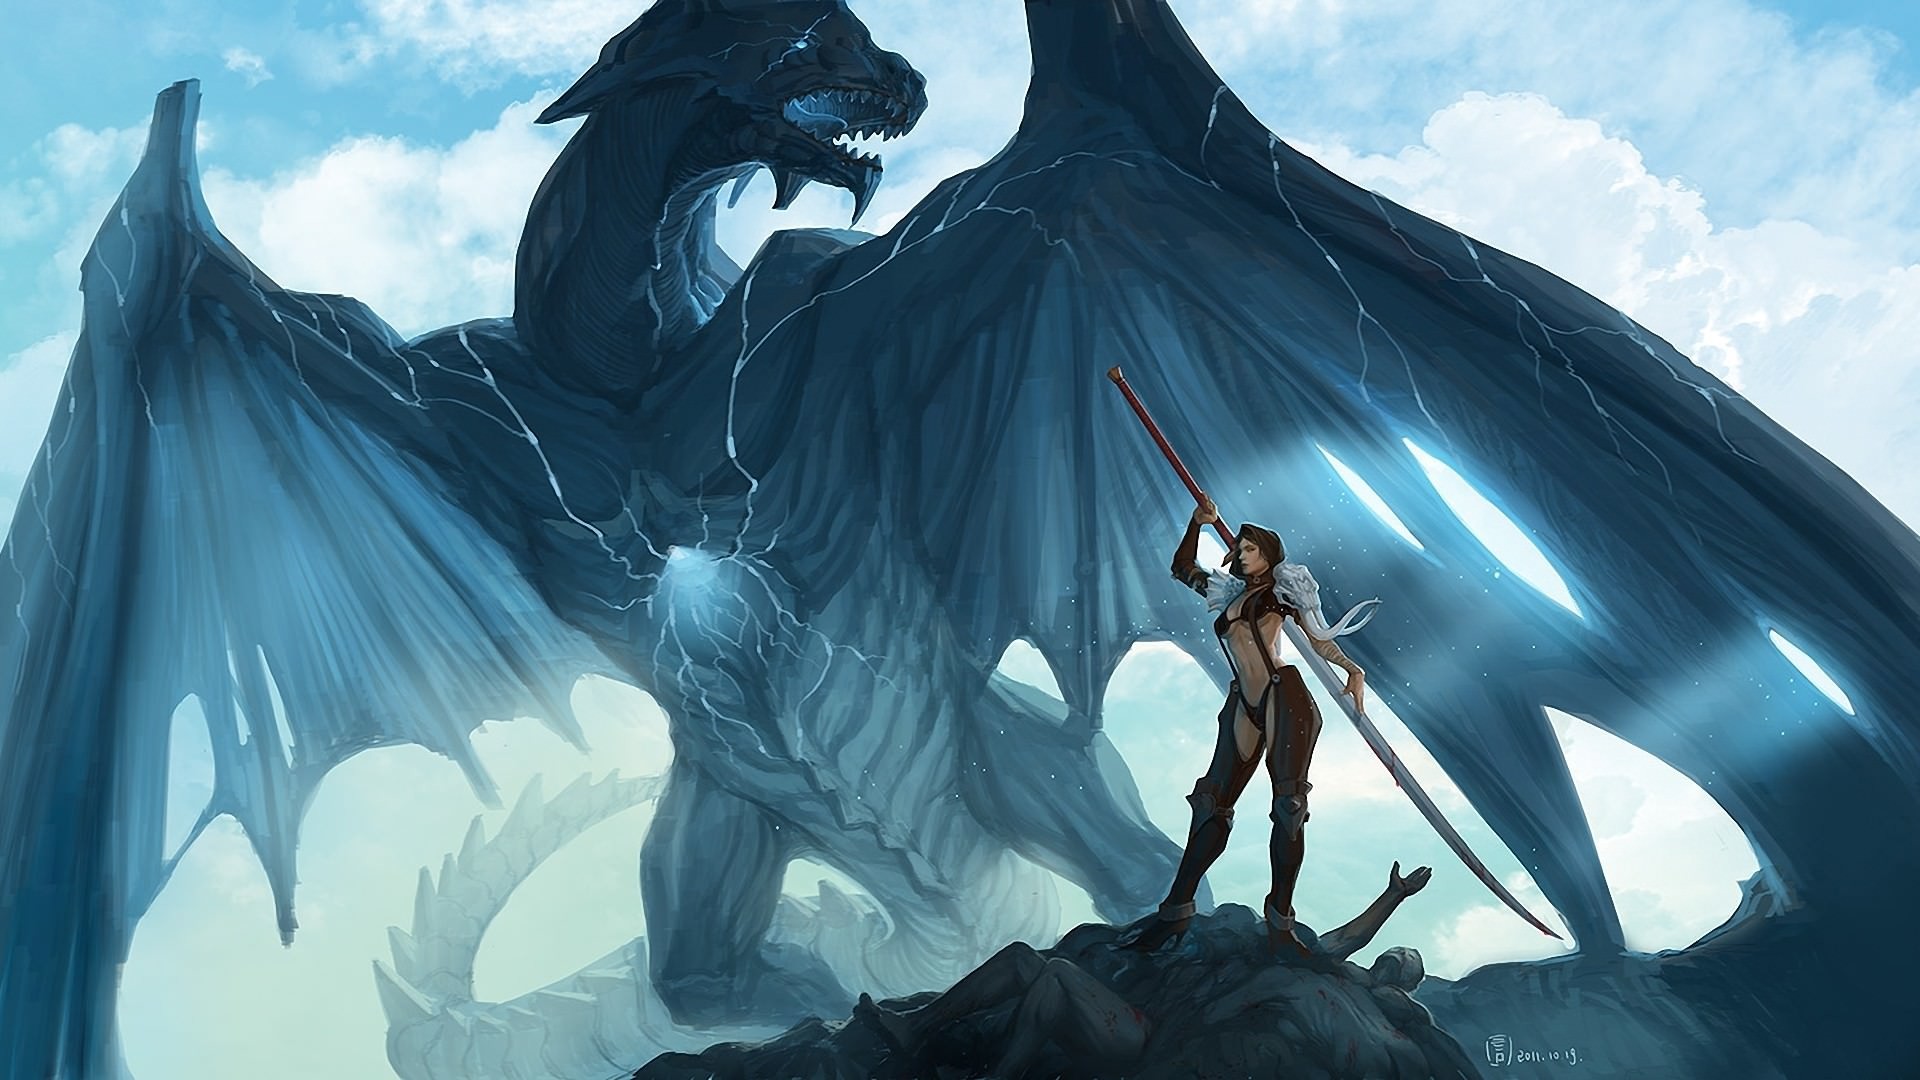 1920x1080 Armor Girl Blood Corpse Dragon Wallpaper - 1920 x Digital painting of a girl  in armor with her blue dragon.